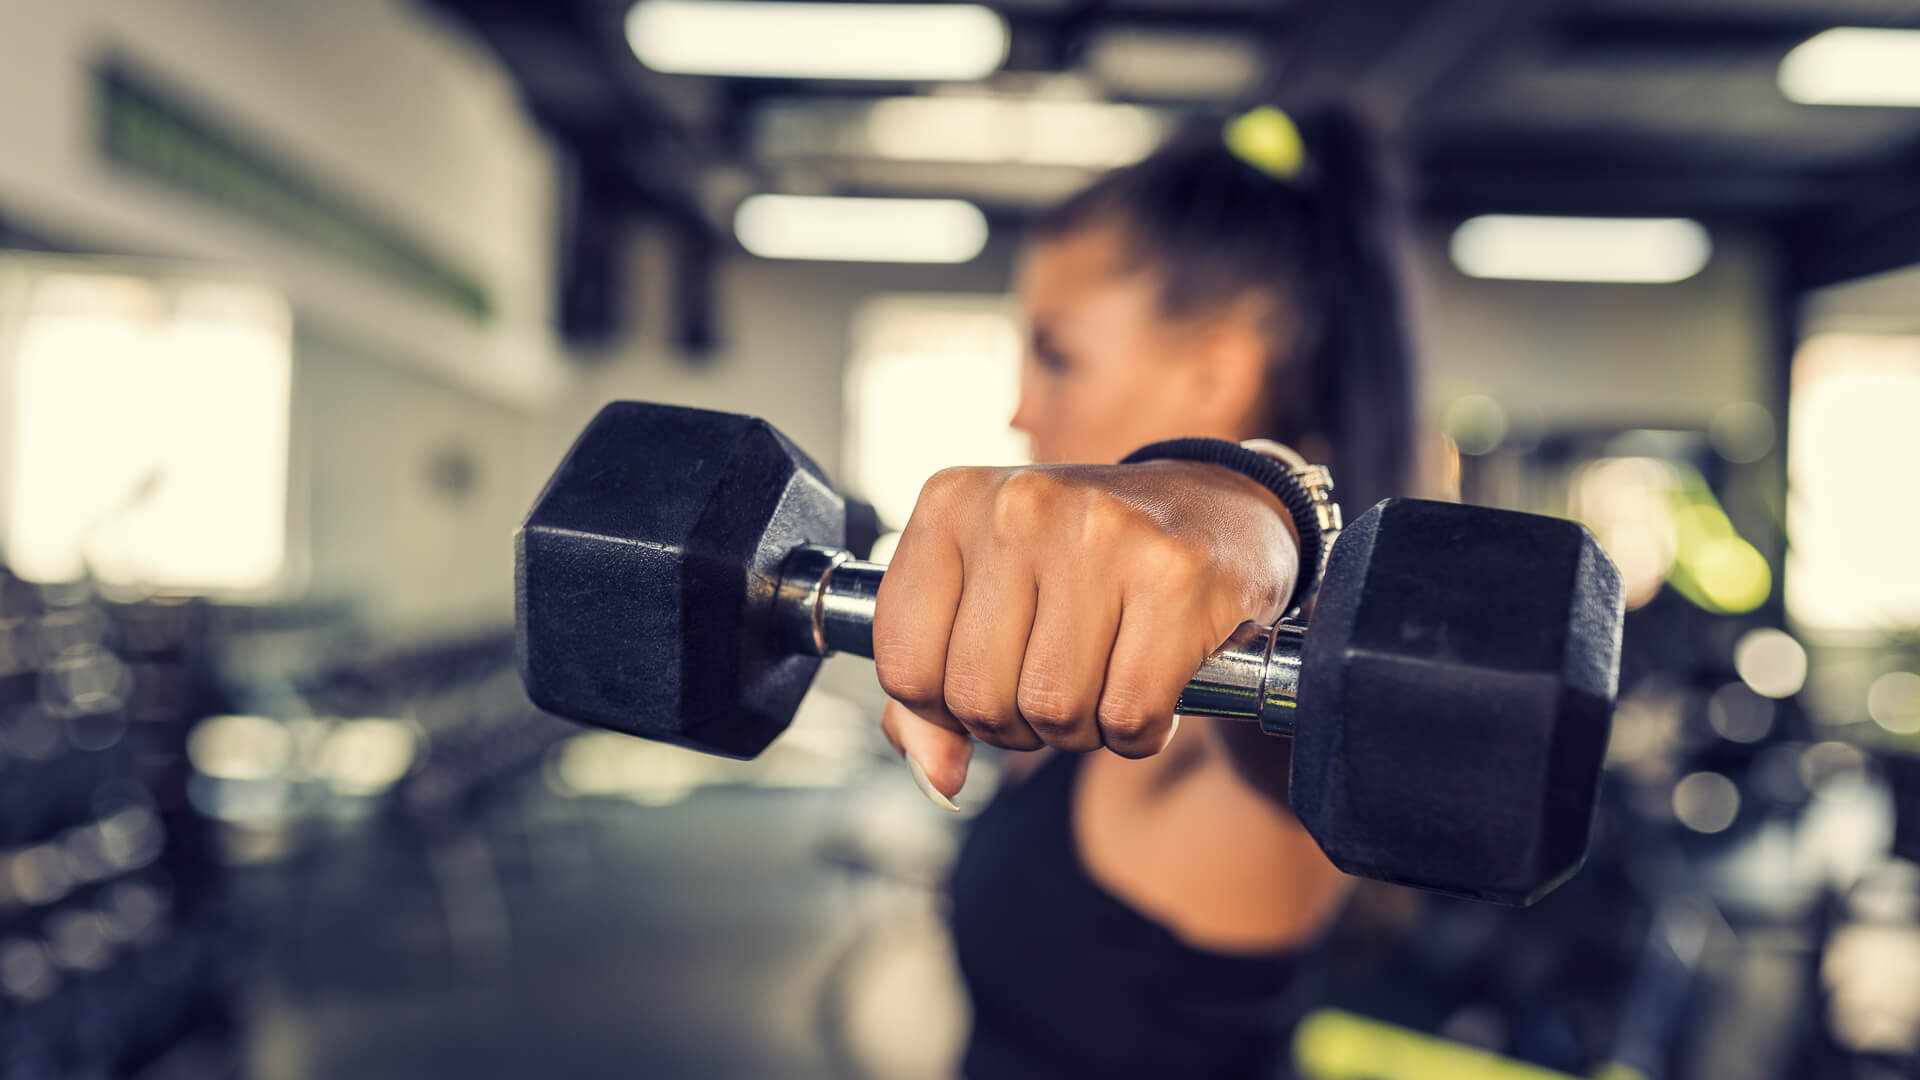 Cheap Gym Memberships Near Me: Find the Best Ones To Stay Fit